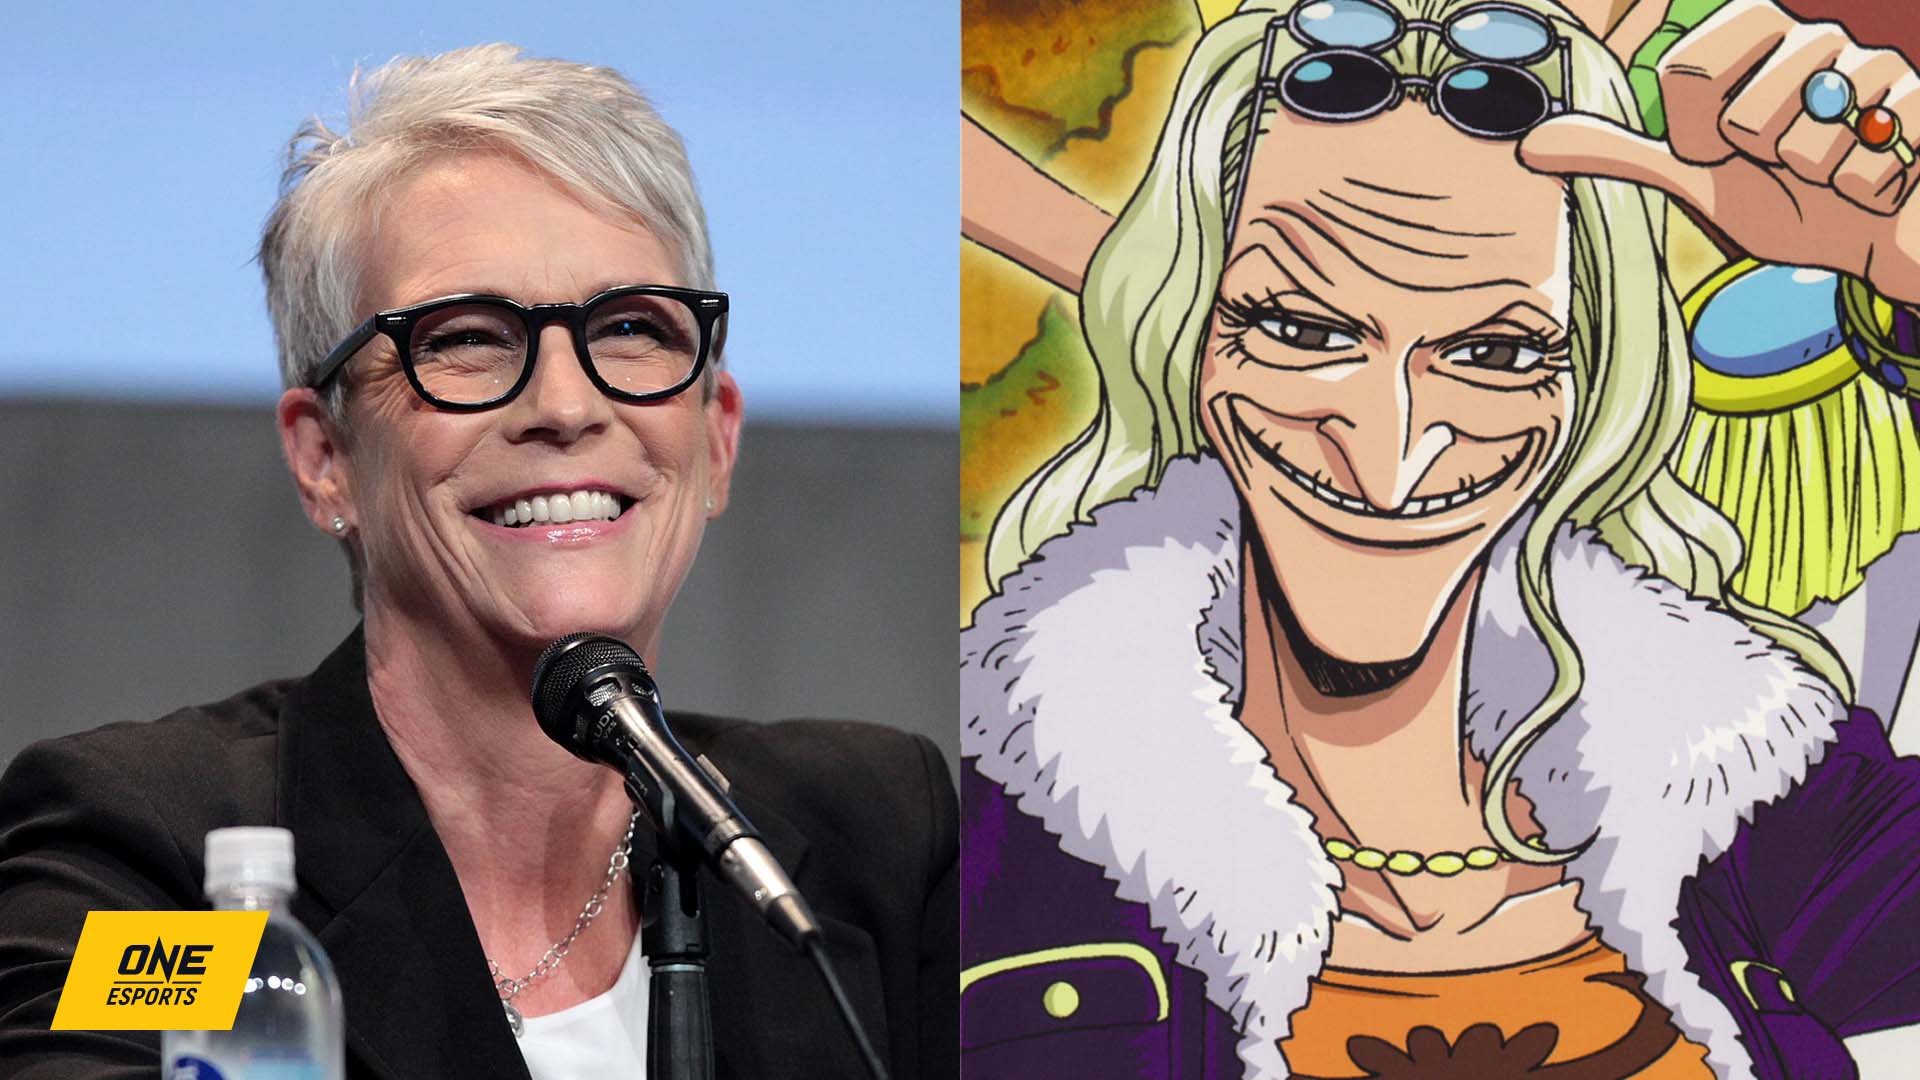 Why Jamie Lee Curtis dreams of playing Kureha in One Piece | ONE Esports